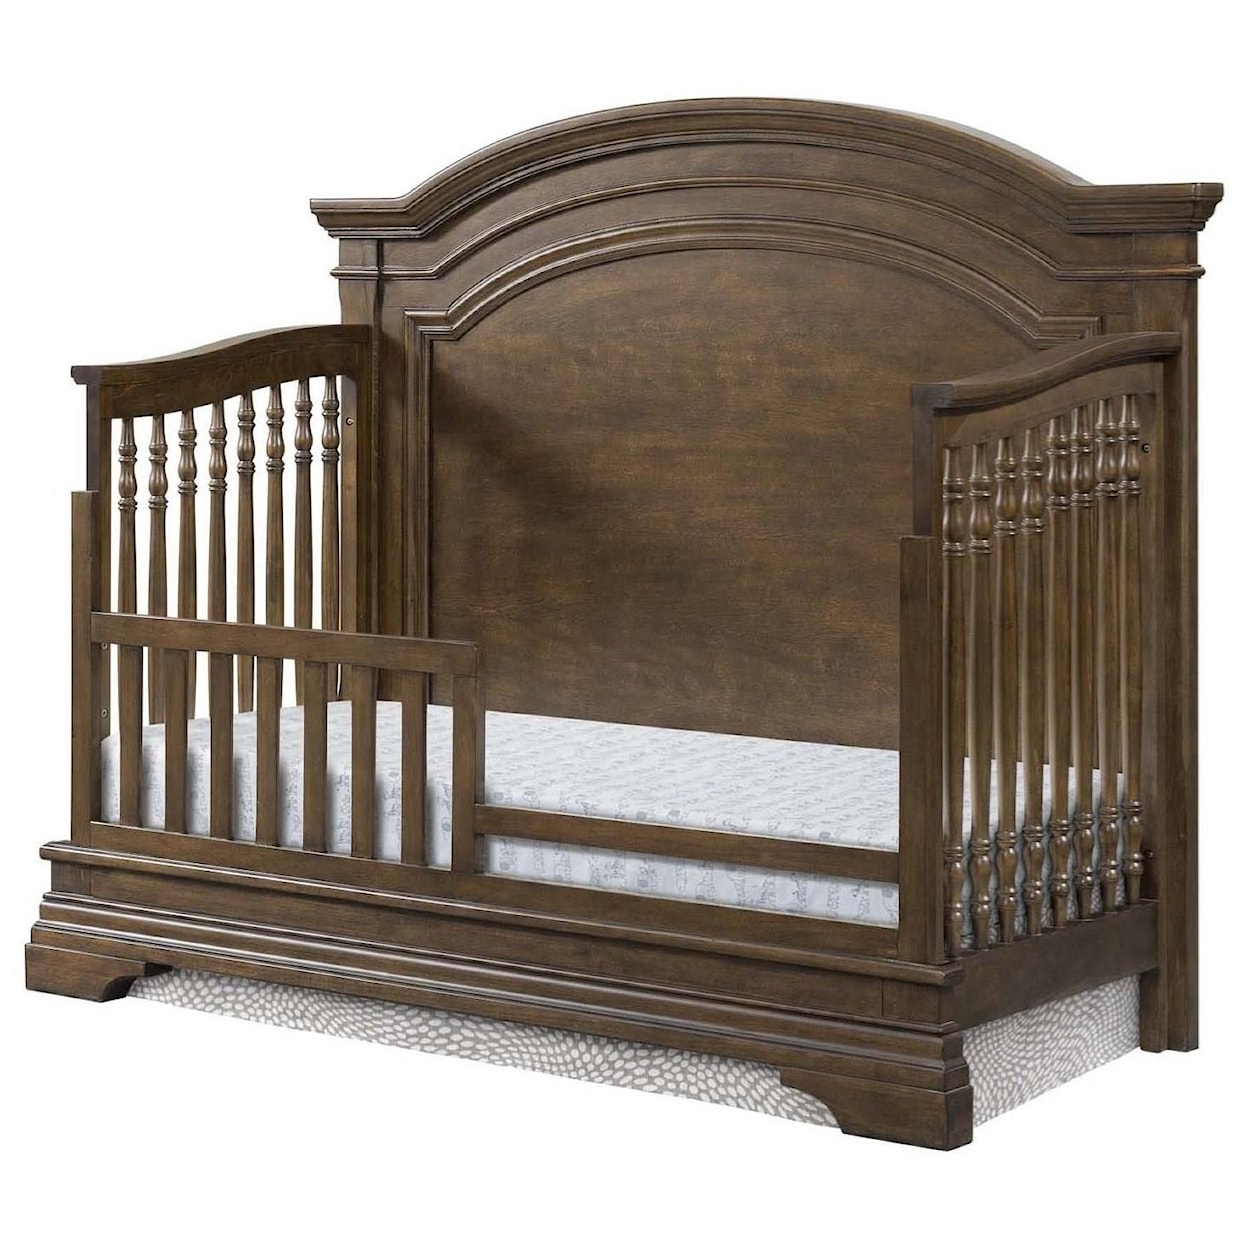 Westwood Design Olivia Arch Top Convertible Crib